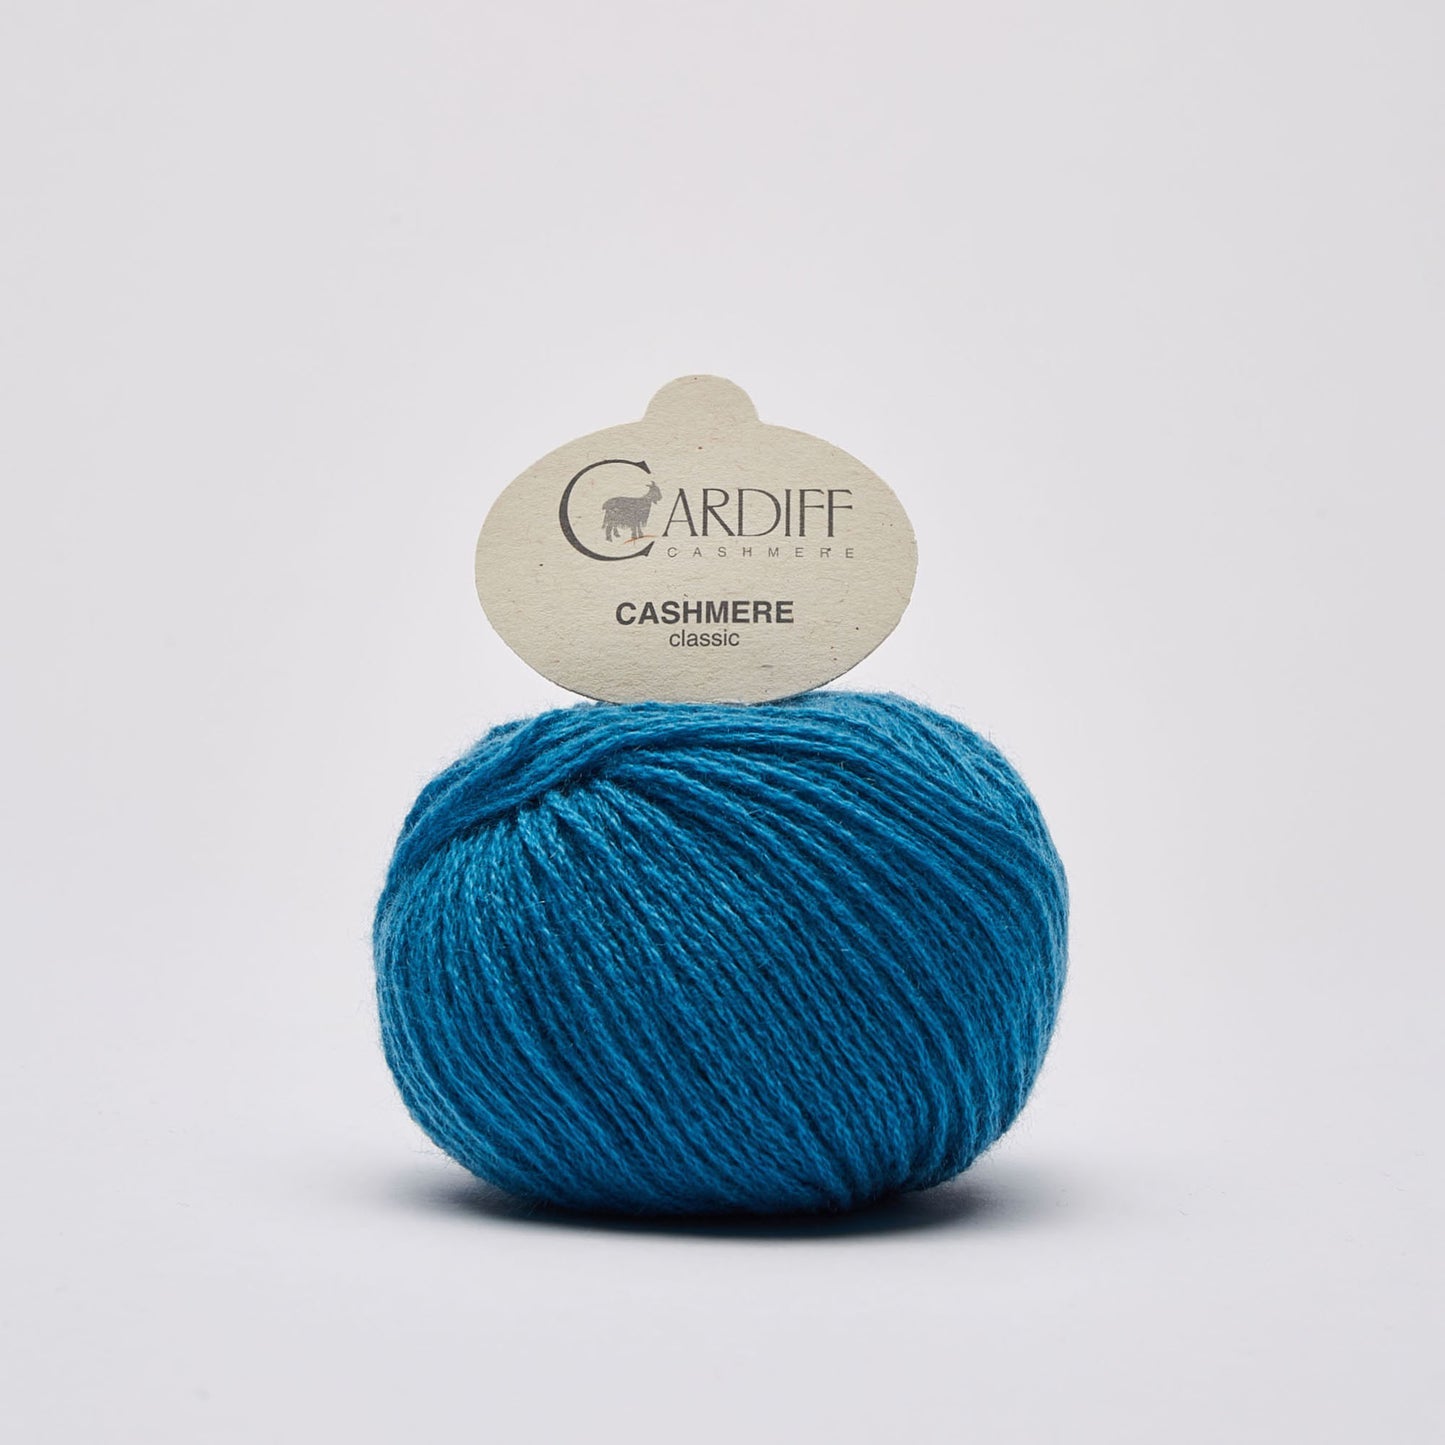 Cardiff CLASSIC gentle yarn, 590, BARRY, comp: 100% Cashmere